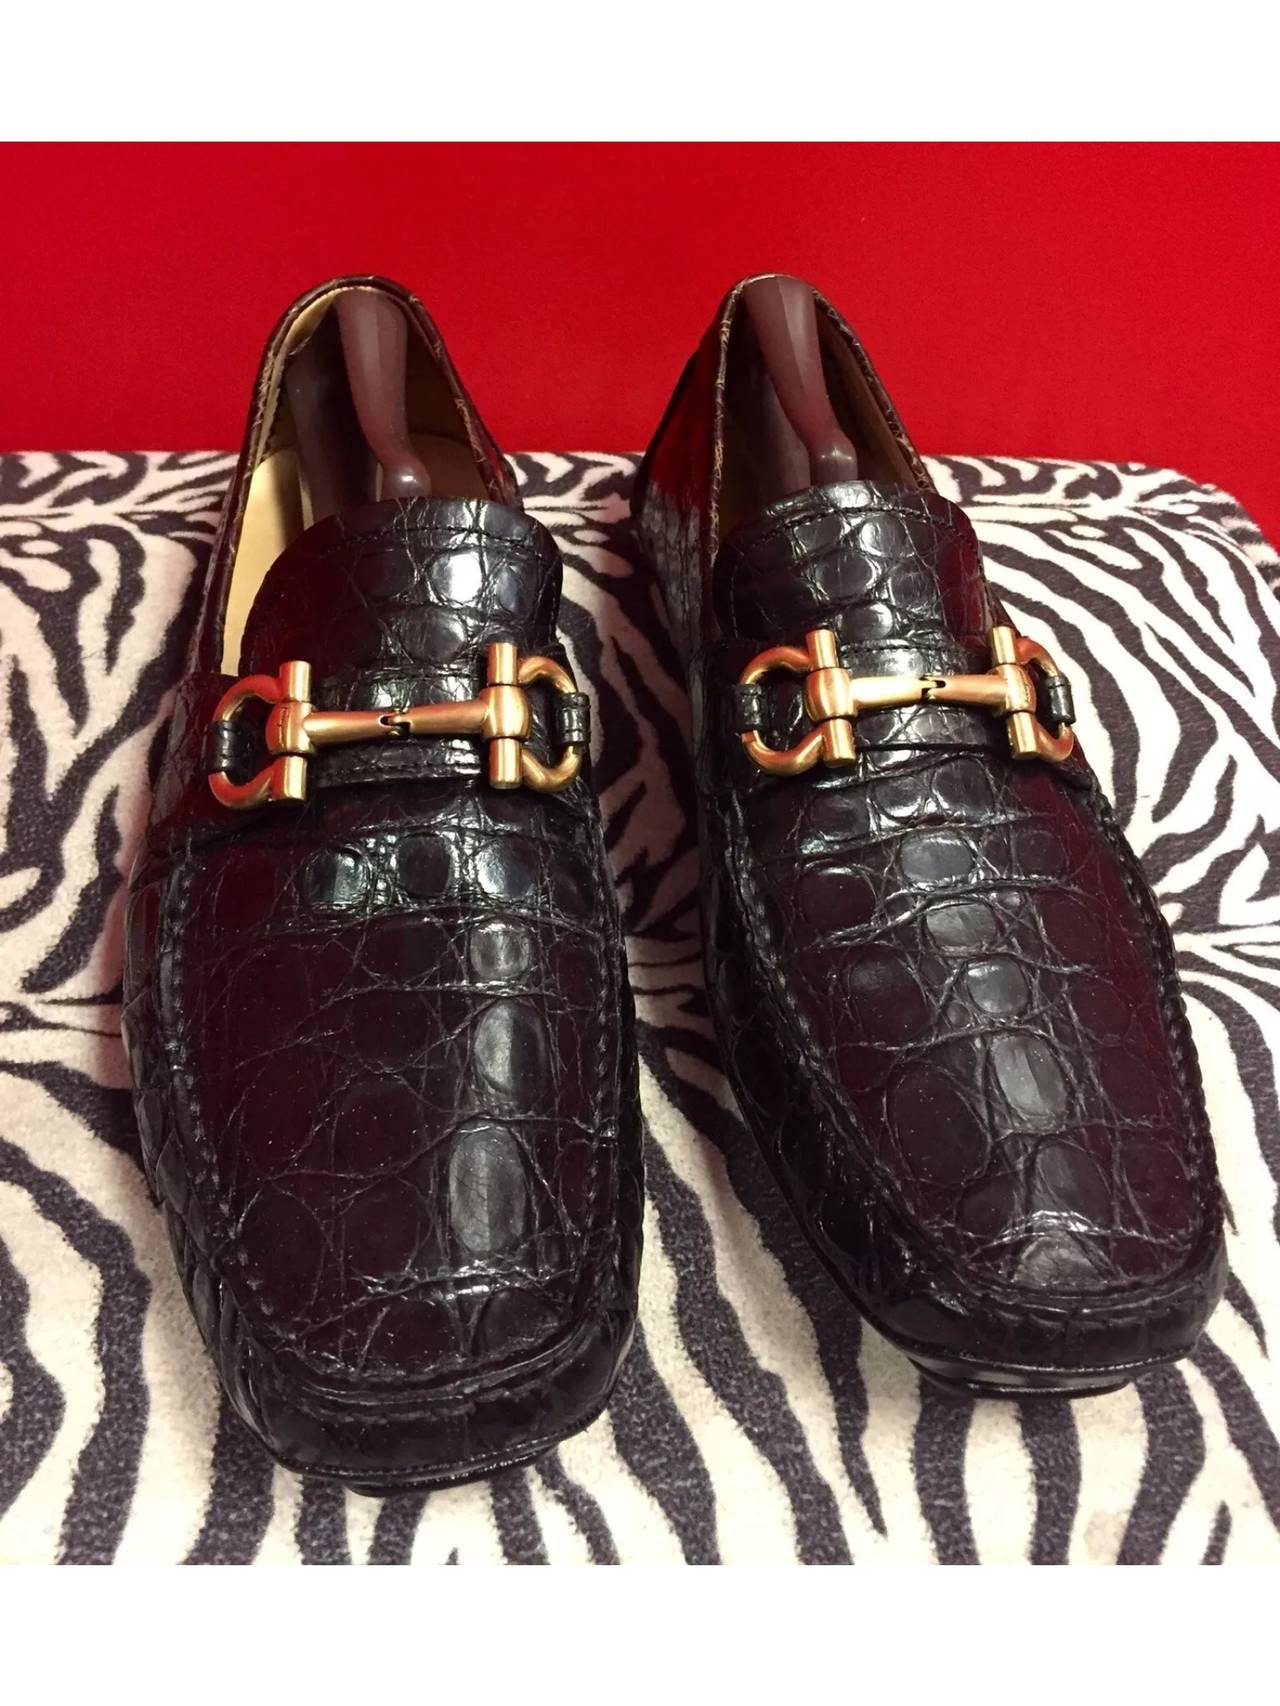 These are a pair of Salvatore Ferragamo Black Crocodile Loafers Matte Gold Gancio bit Slip On style. 
They are in excellent condition!